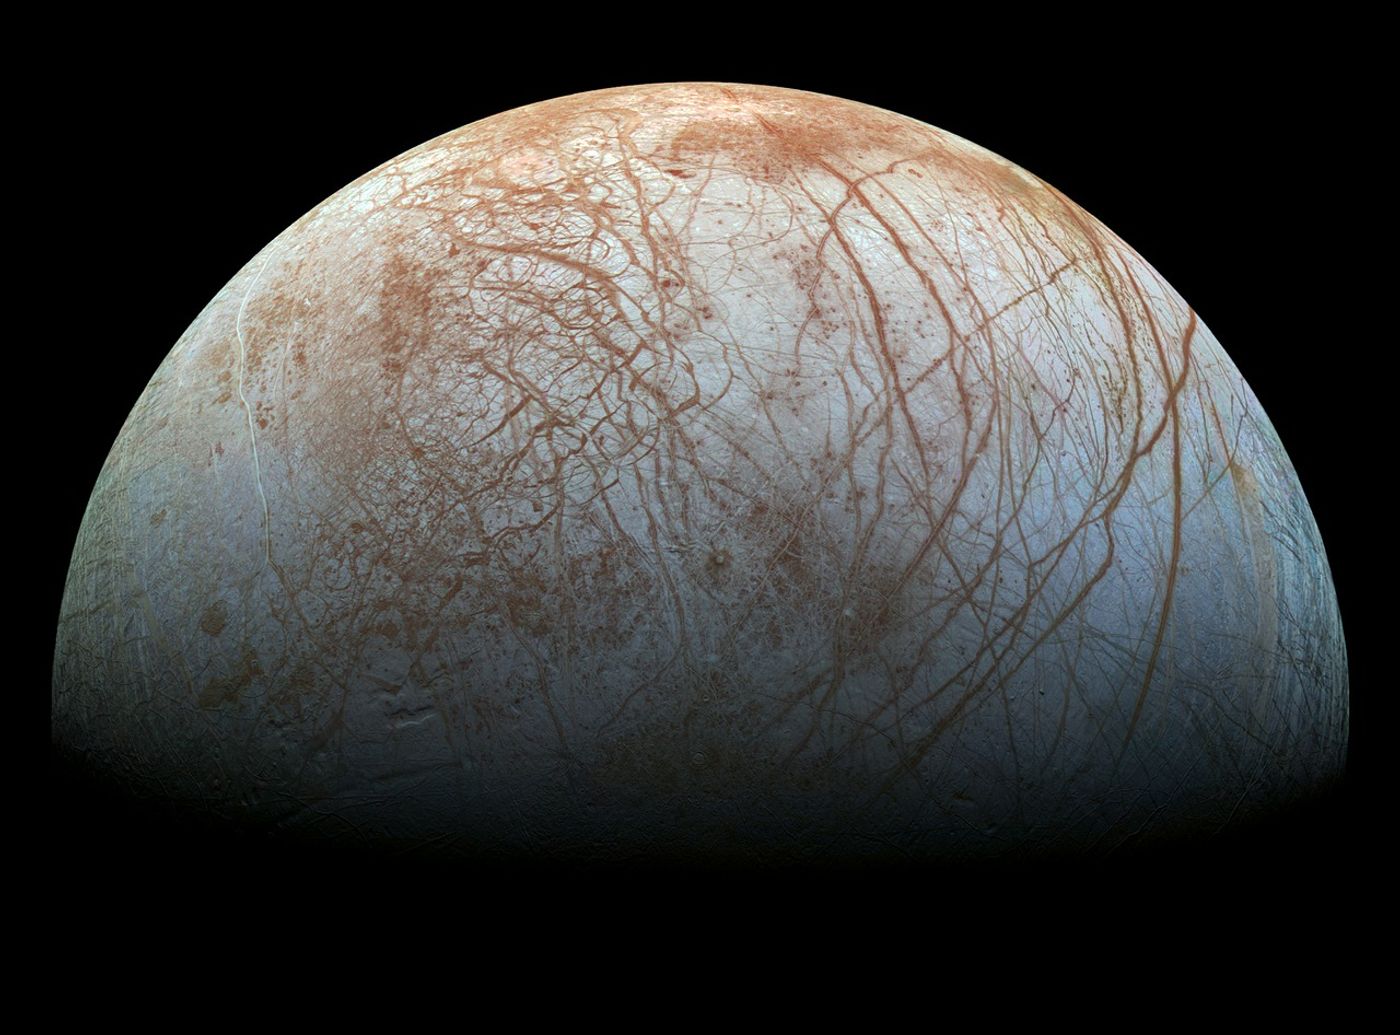 Europa is one of the moons of Jupiter that NASA wants to study with the James Webb Space Telescope.